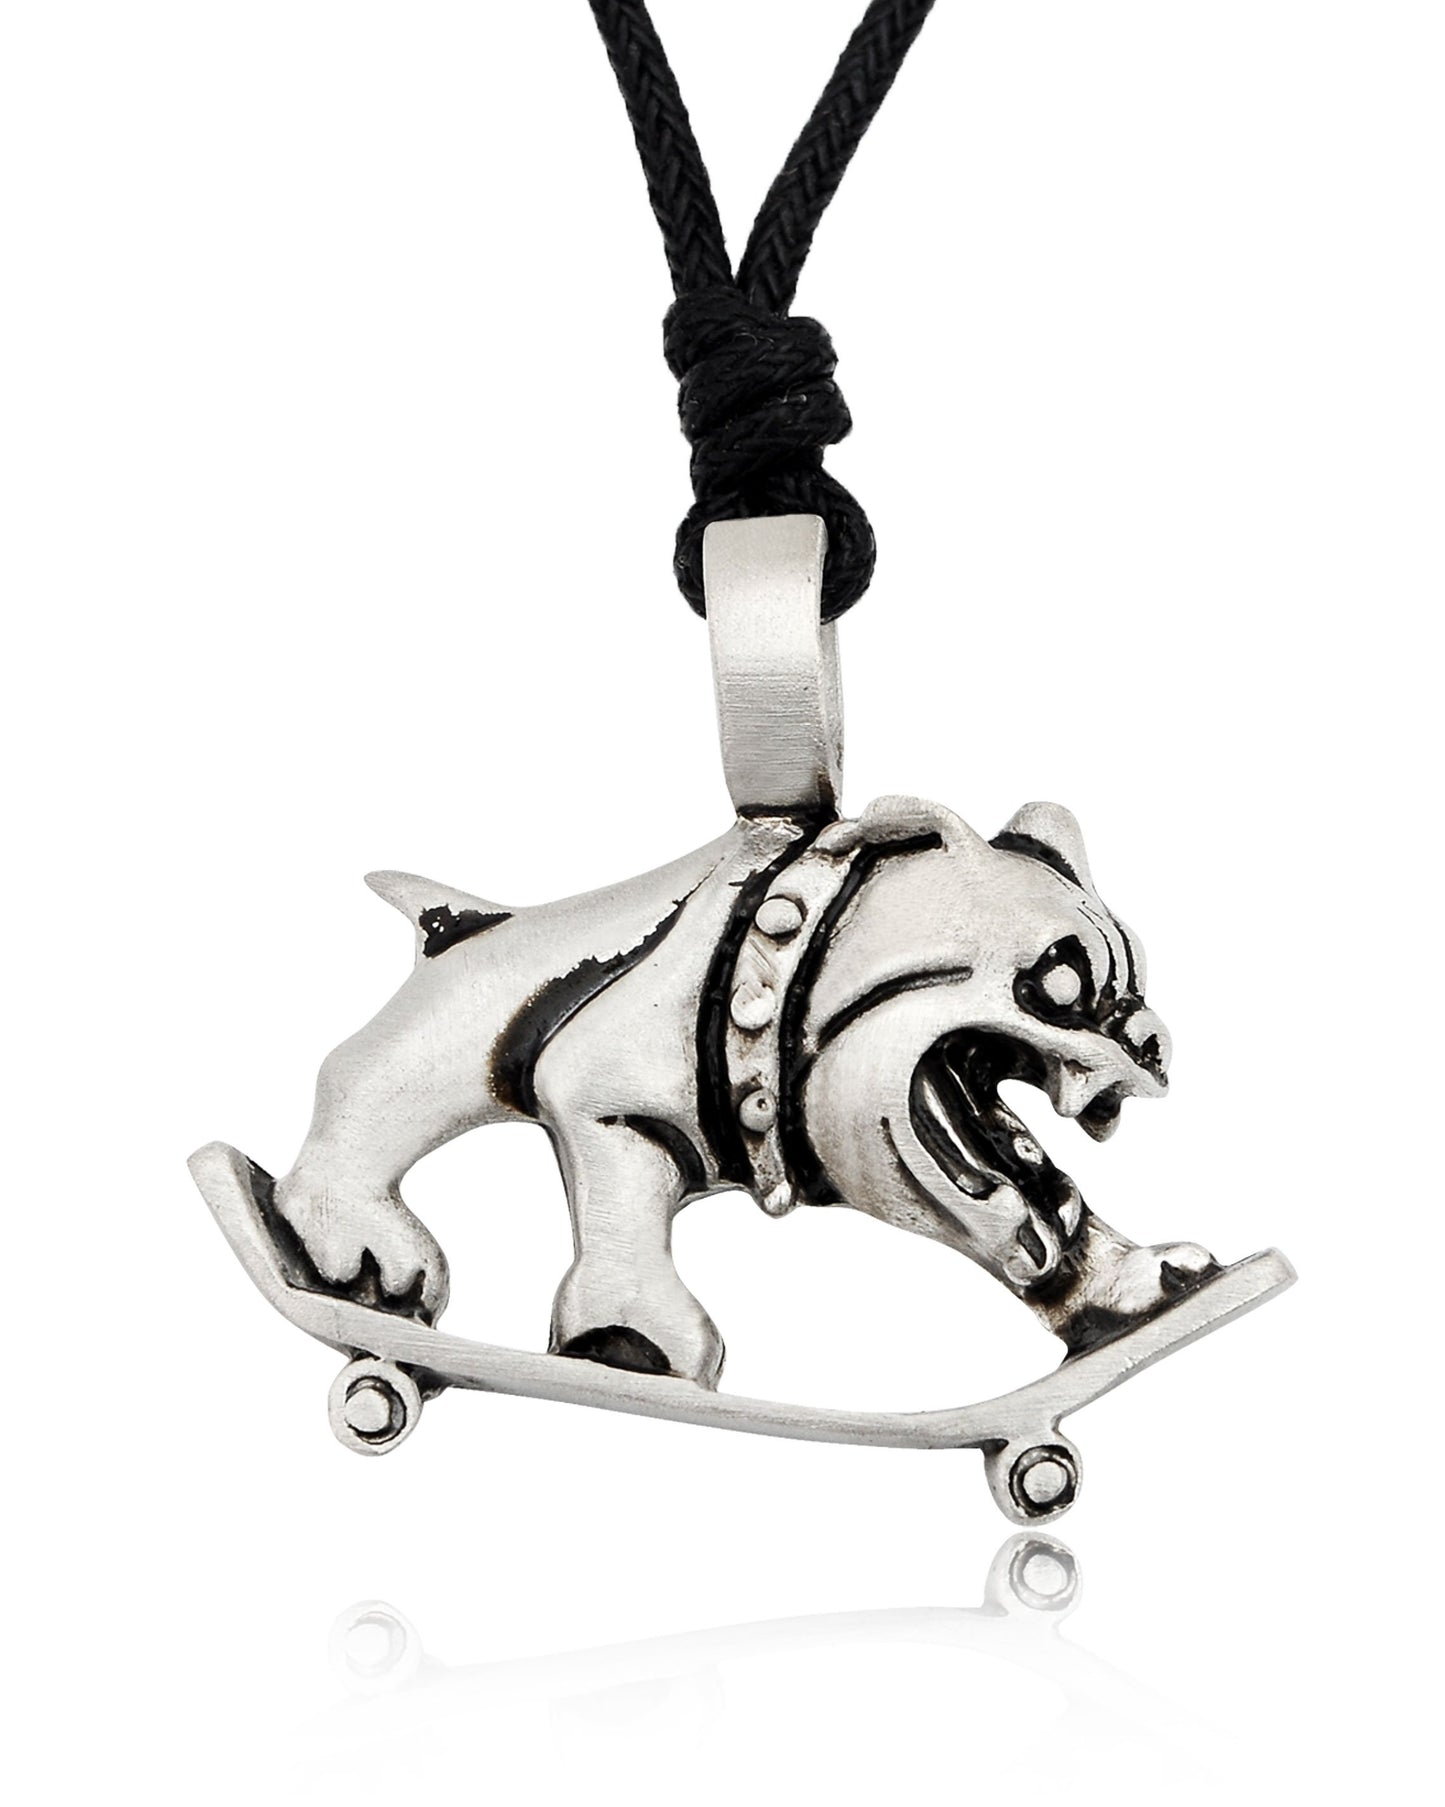 New Bulldog On Skateboard Silver Pewter Charm Necklace Pendant Jewelry